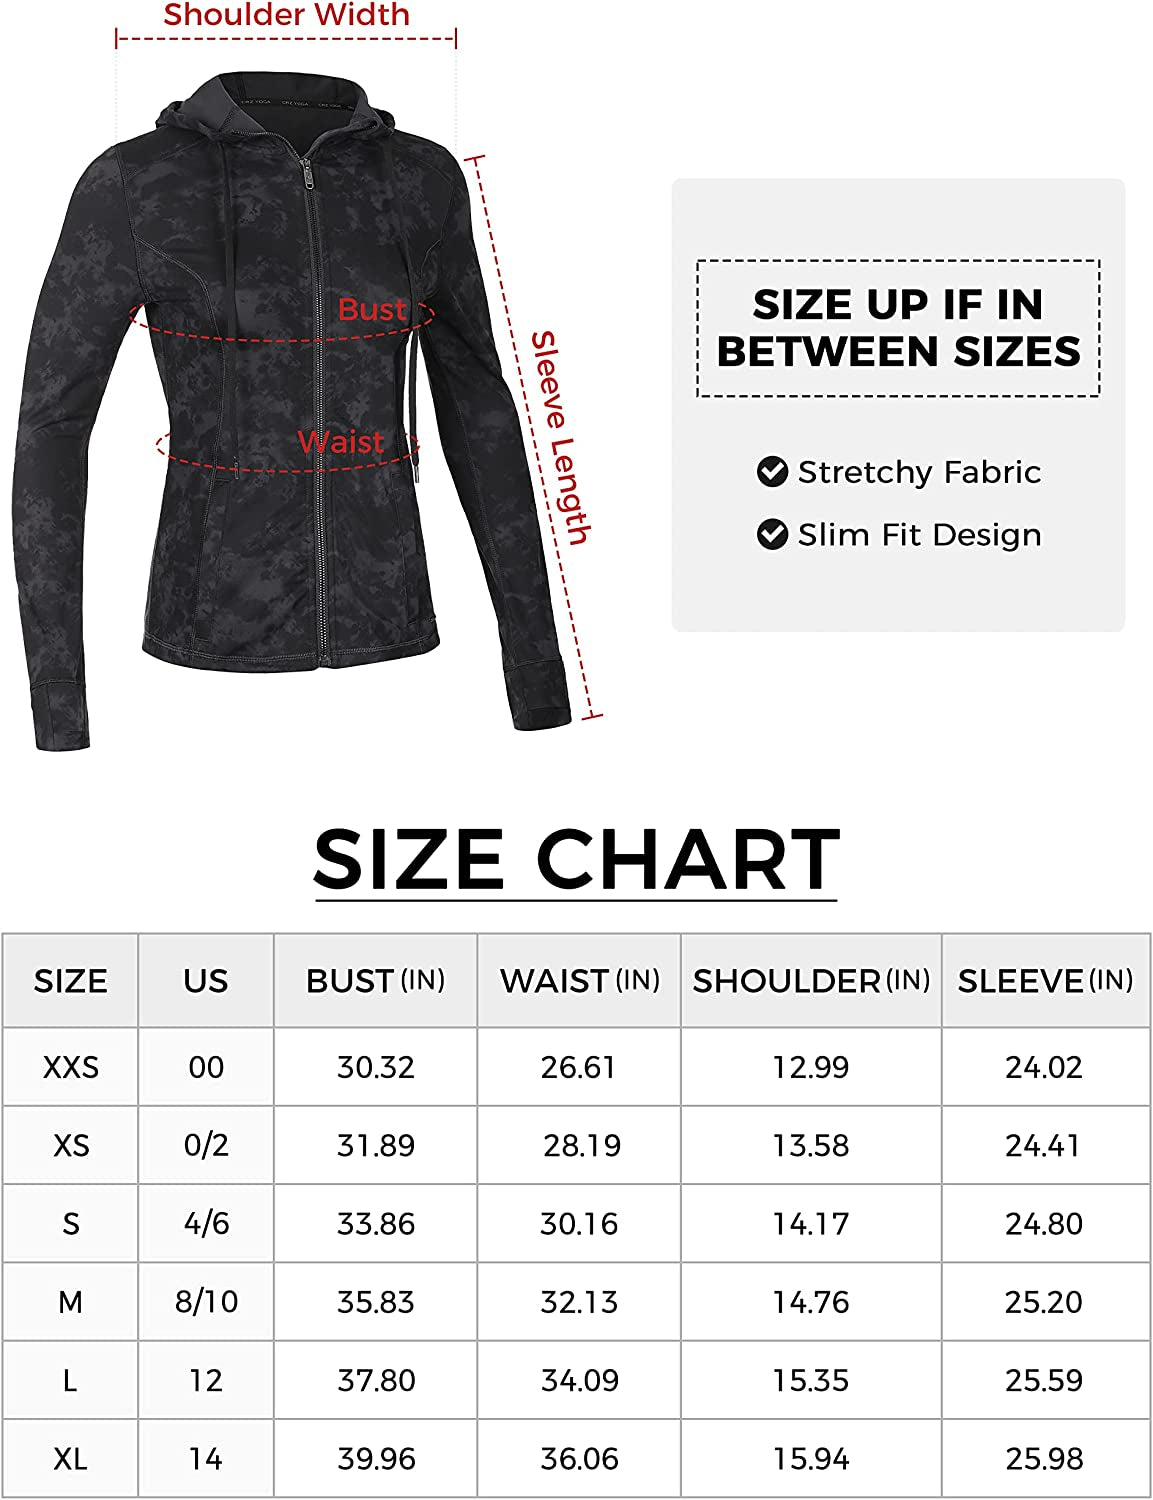 "Women's Zip-Up Hoodie Jacket - A Comfortable and Fashionable Choice for Workout Sessions, Complete with Convenient Zip Pockets"